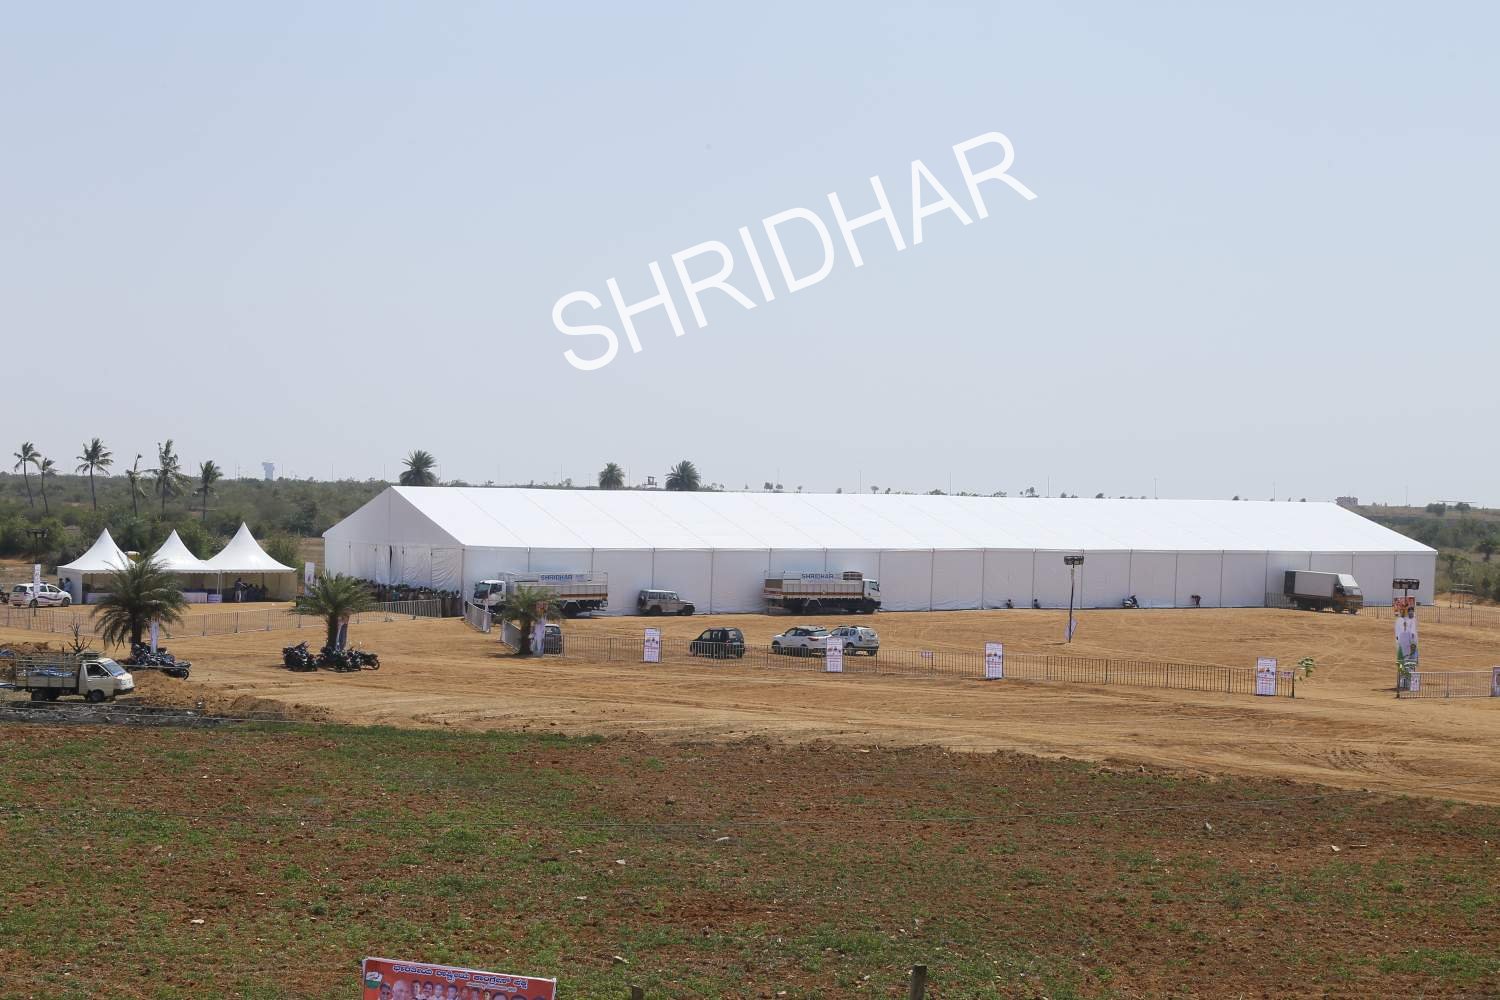 german hangers super structures for rent for conferences in bangalore shridhar tent house